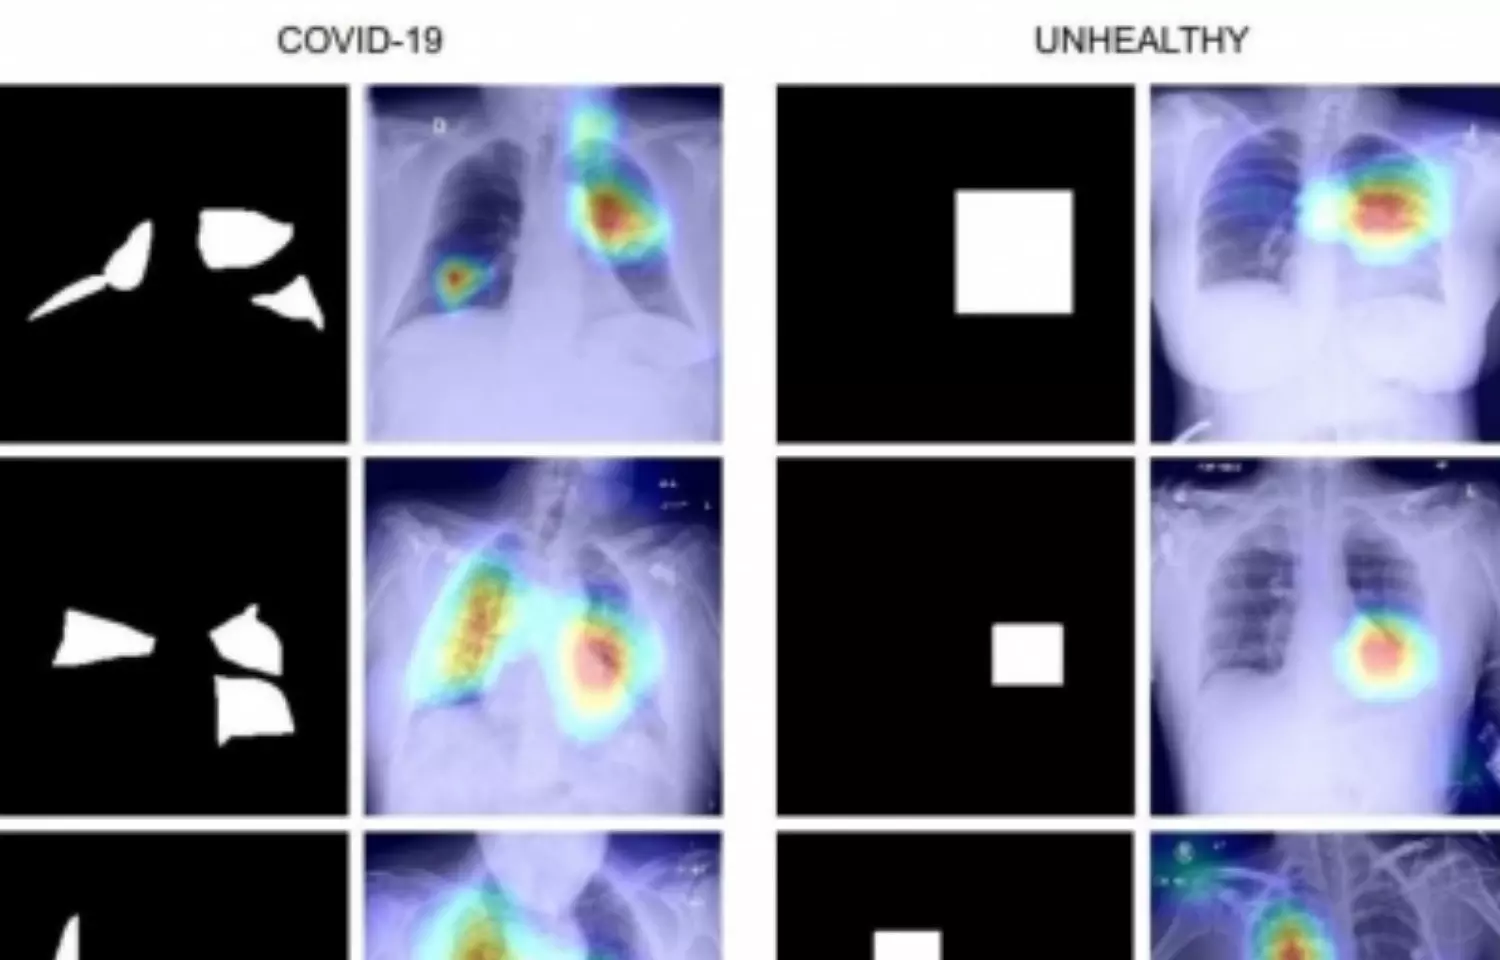 COVID diagnosis technique using chest X-Ray images developed by IIT Jodhpur